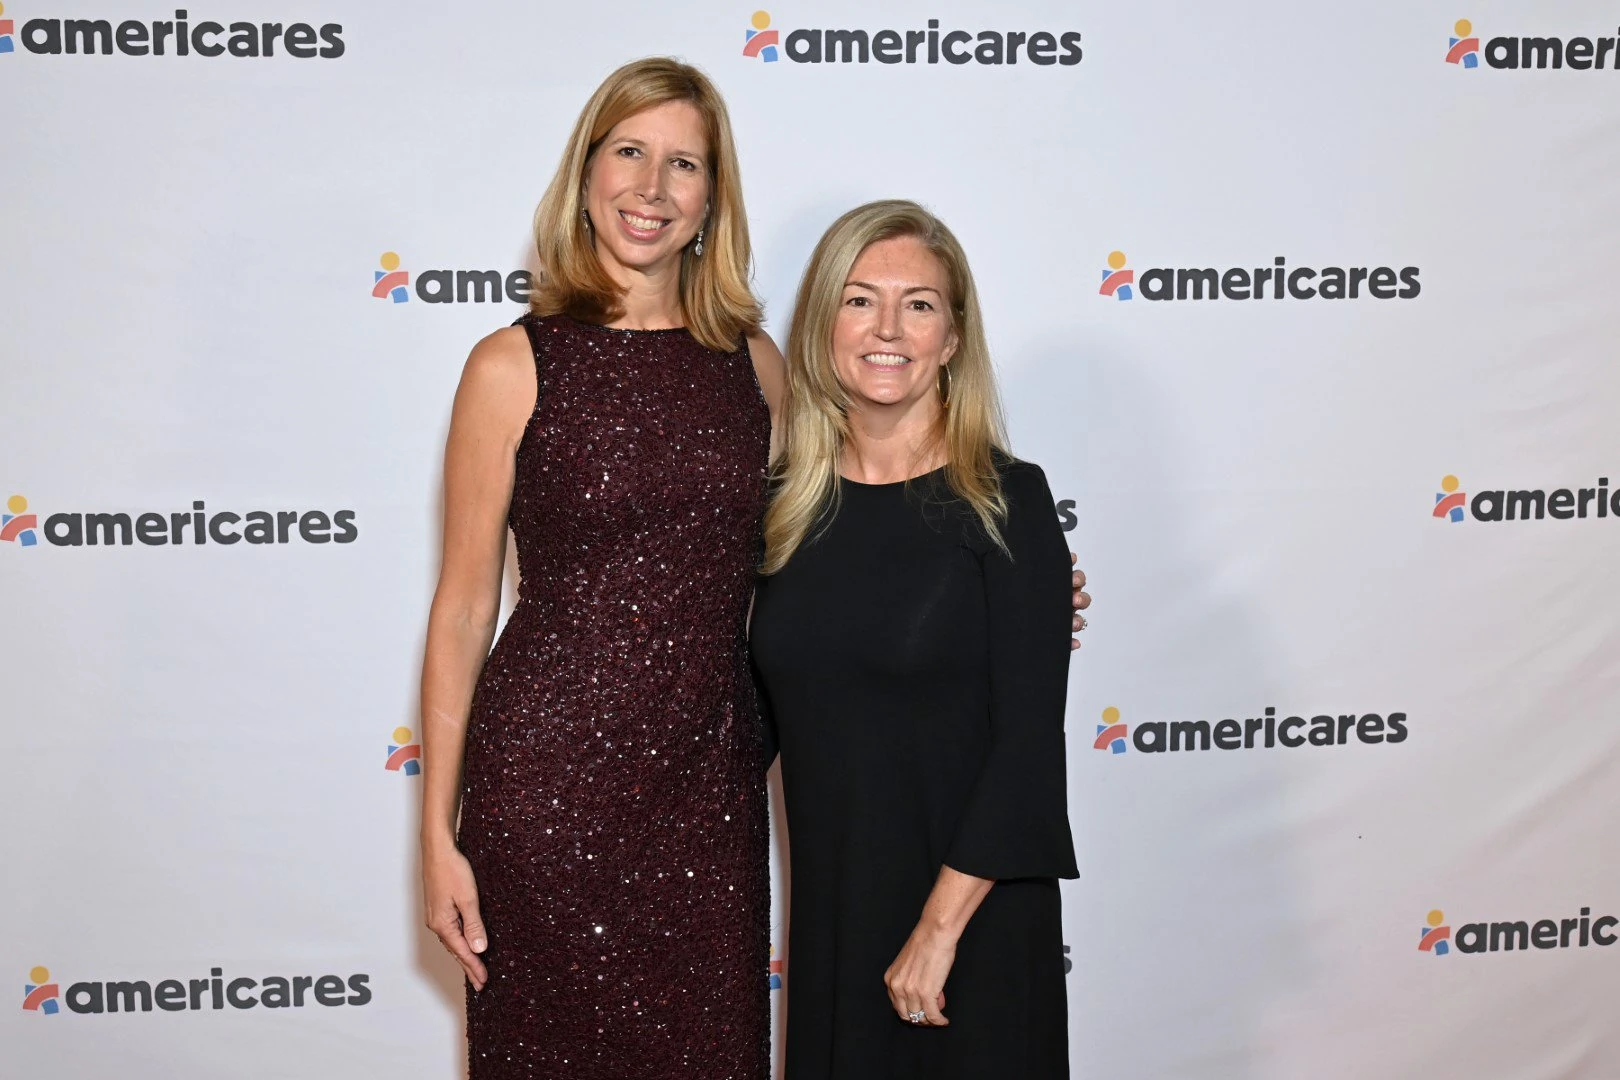 Americares President and CEO Christine Squires and Americares Board Chair Susan Grossman attend the 2022 Americares Airlift Benefit at Westchester County Airport on October 1, 2022 in Harrison, New York. Photo by Bryan Bedder/Getty Images for Americares.